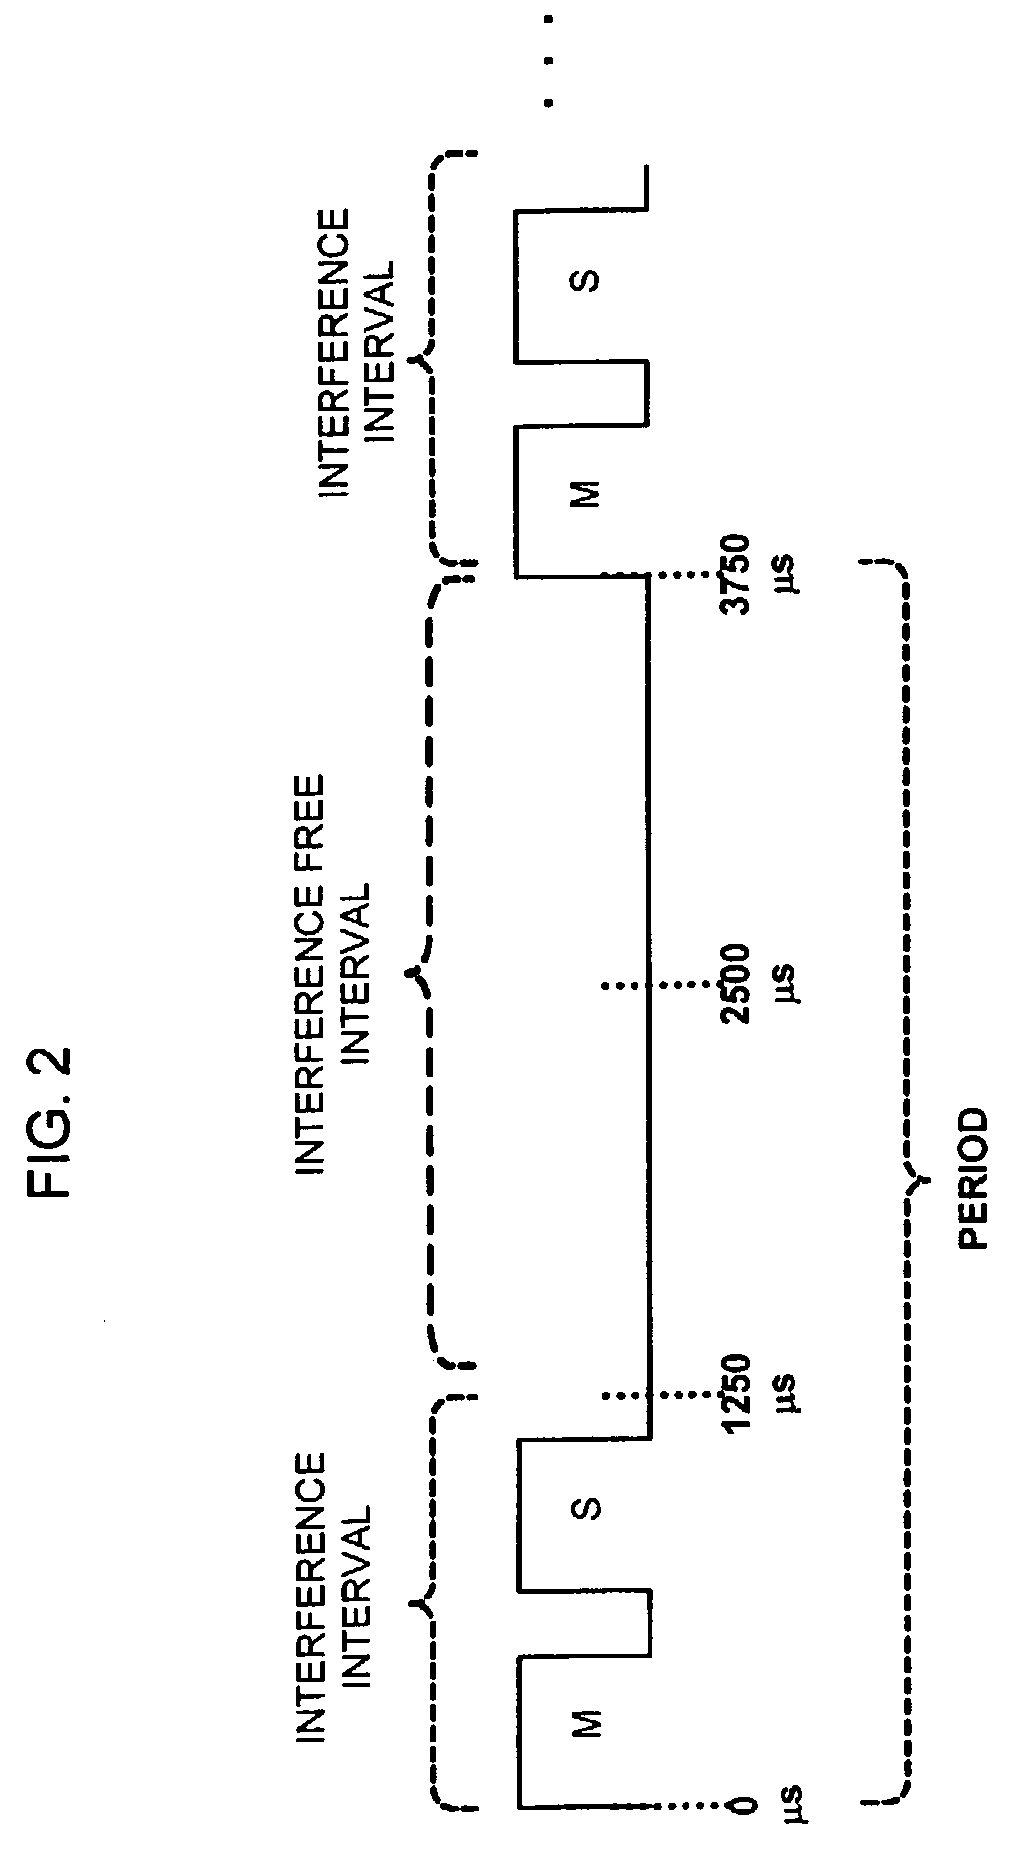 Systems and methods for interference mitigation with respect to periodic interferers in short-range wireless applications